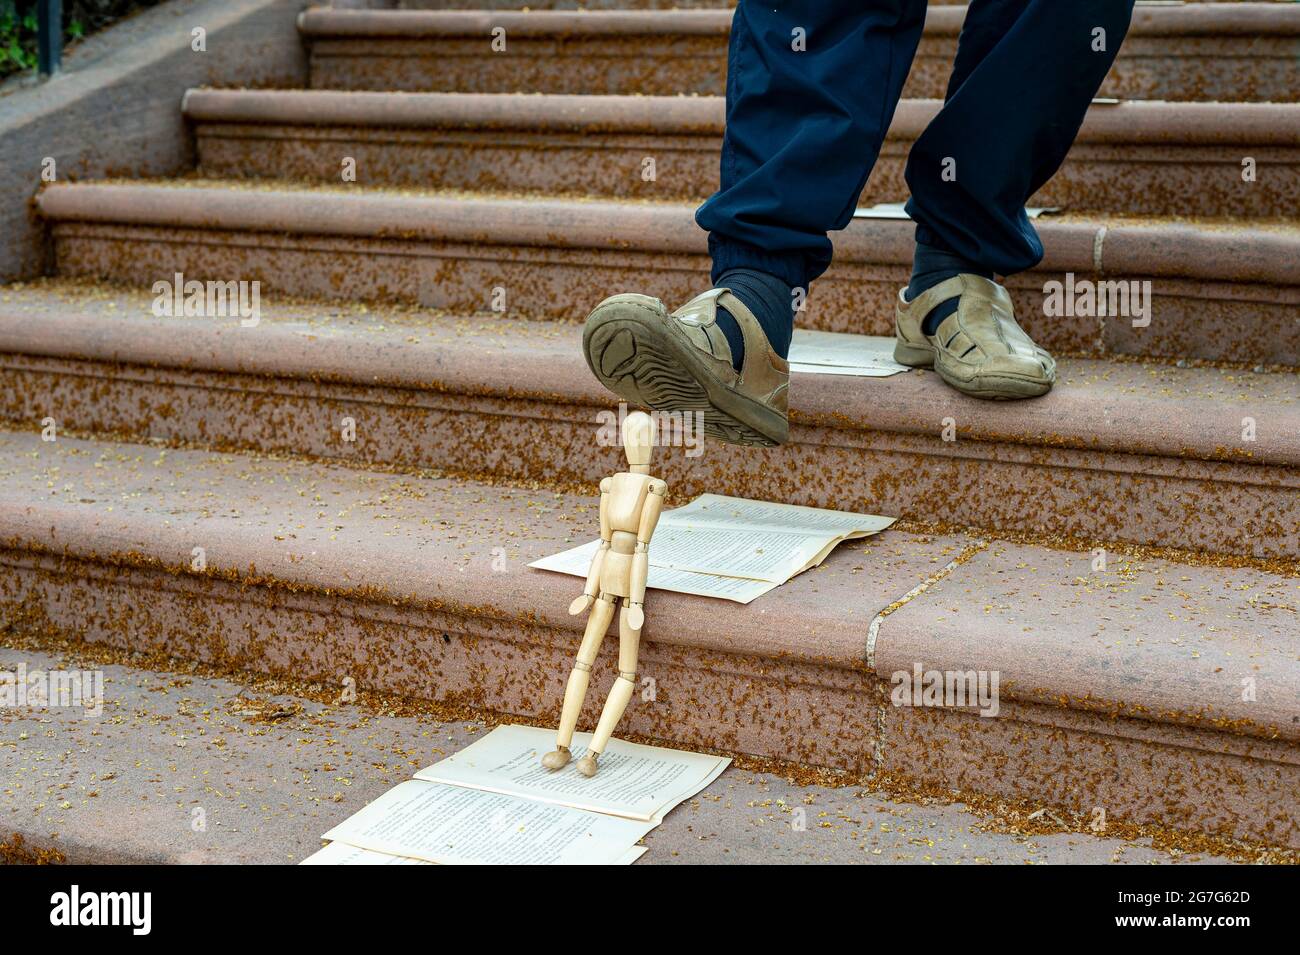 Puppet crushed by a foot in Haguenau, Alsace, France. The puppet leaning against a staircase step is under the foot of a person going down. Stock Photo